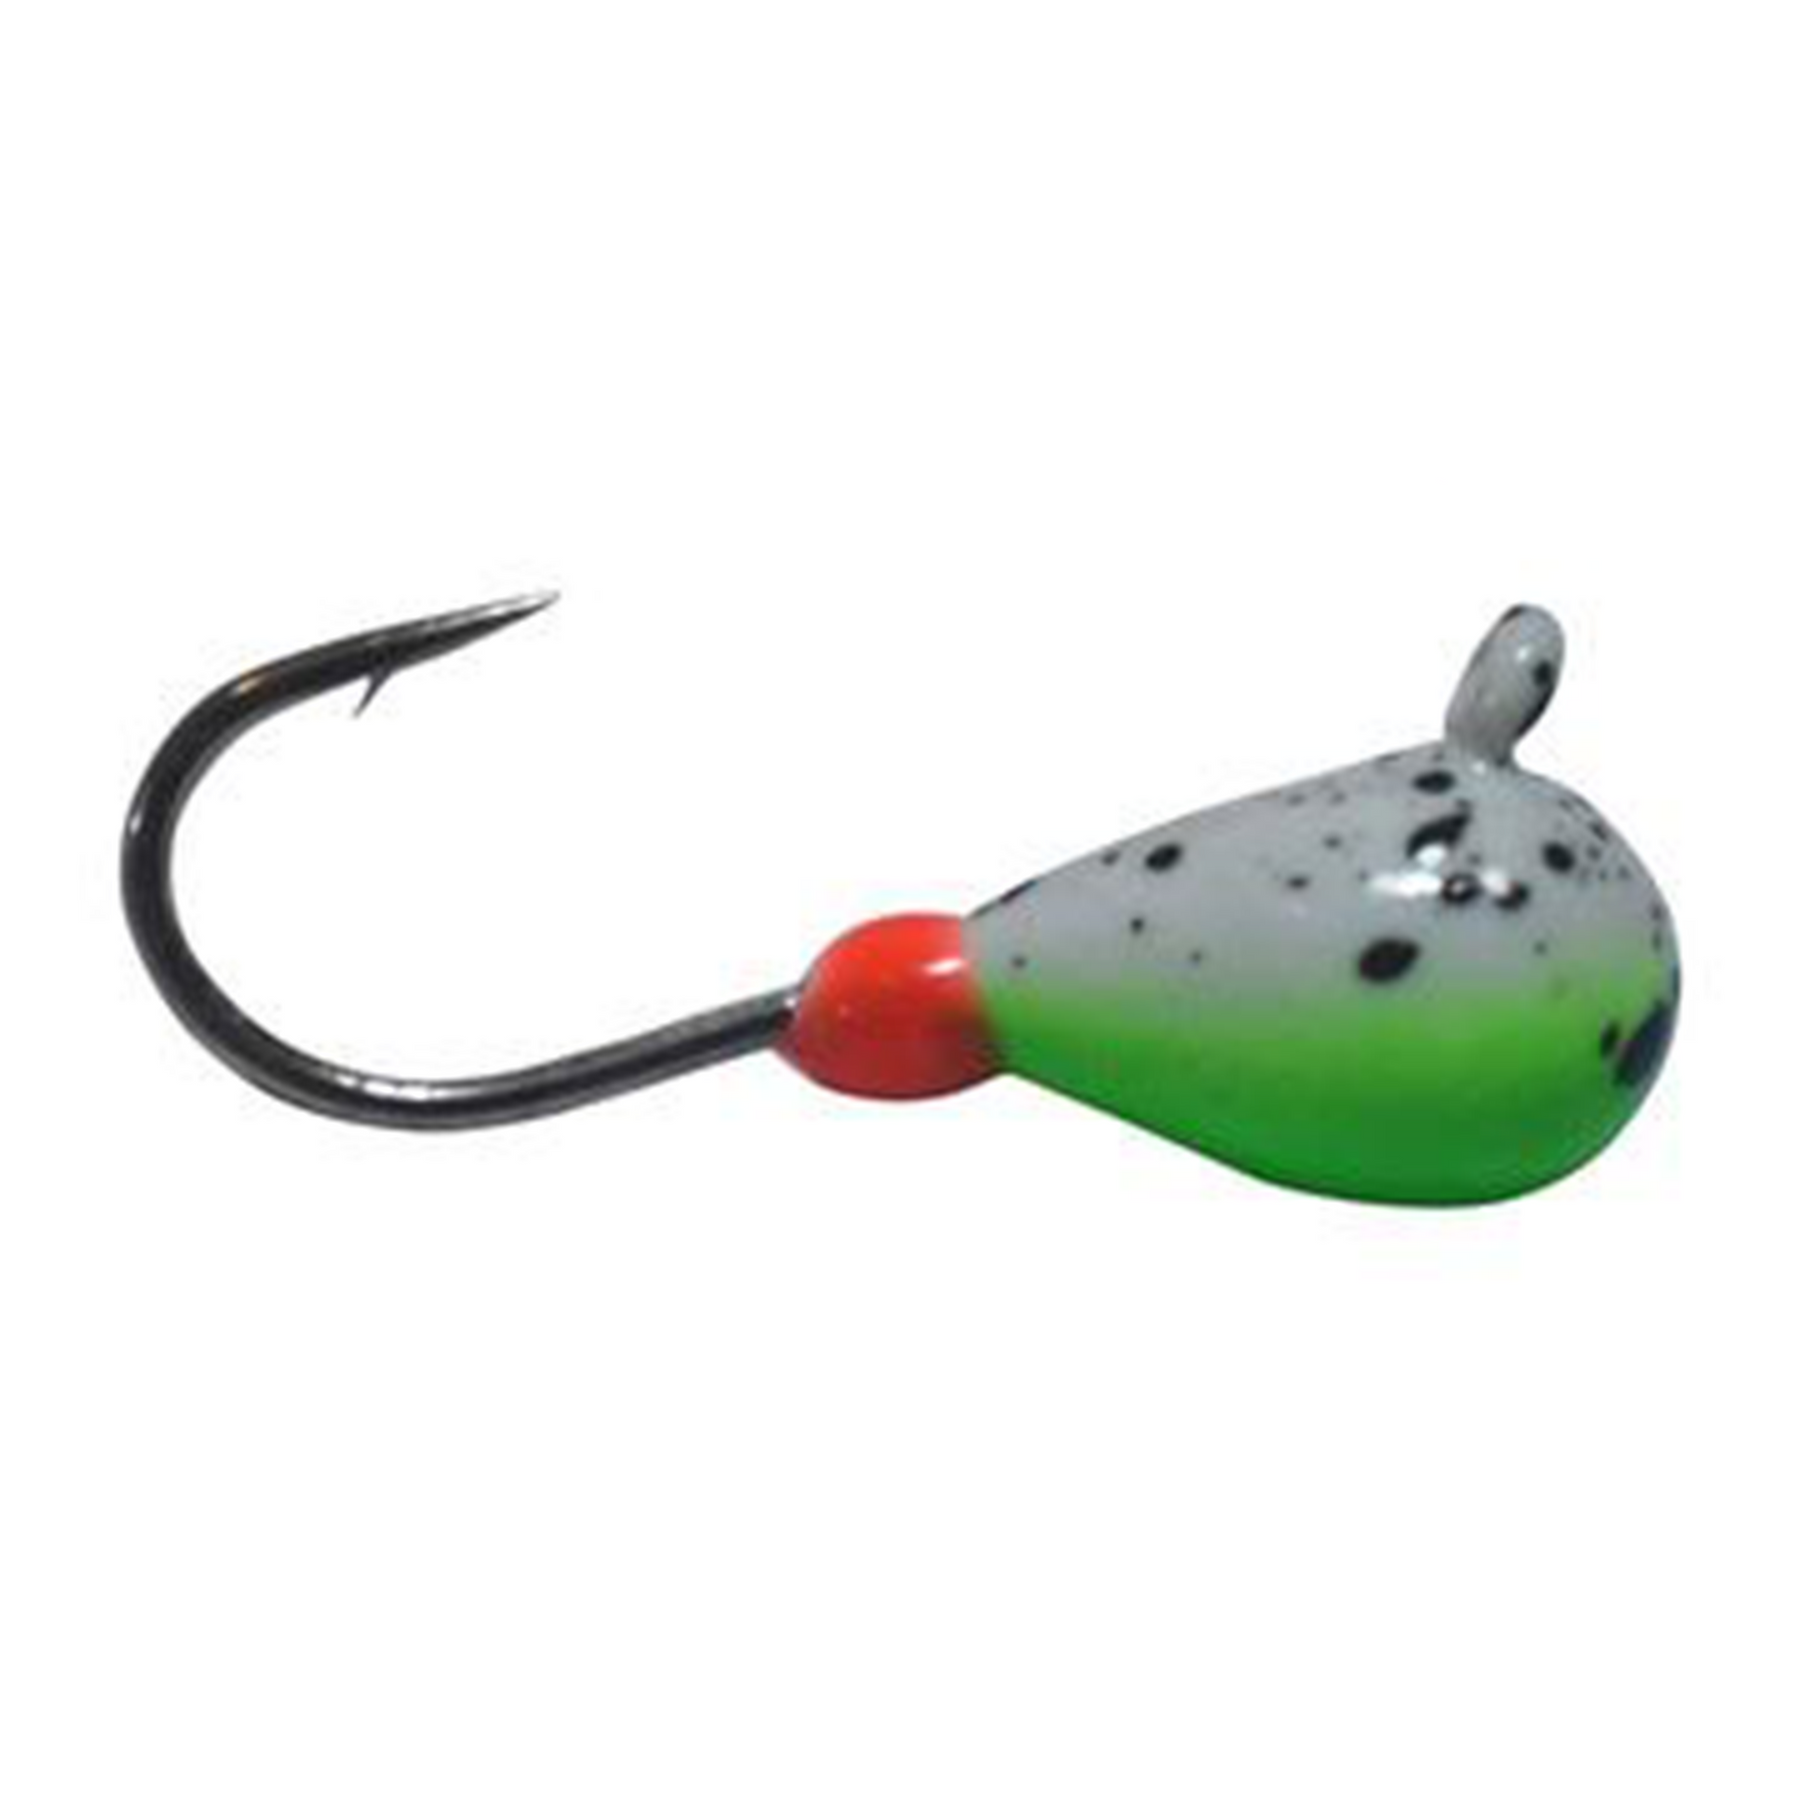 QUALITY TUNGSTEN ICE FISHING JIGS (KENDERS) - Classified Ads